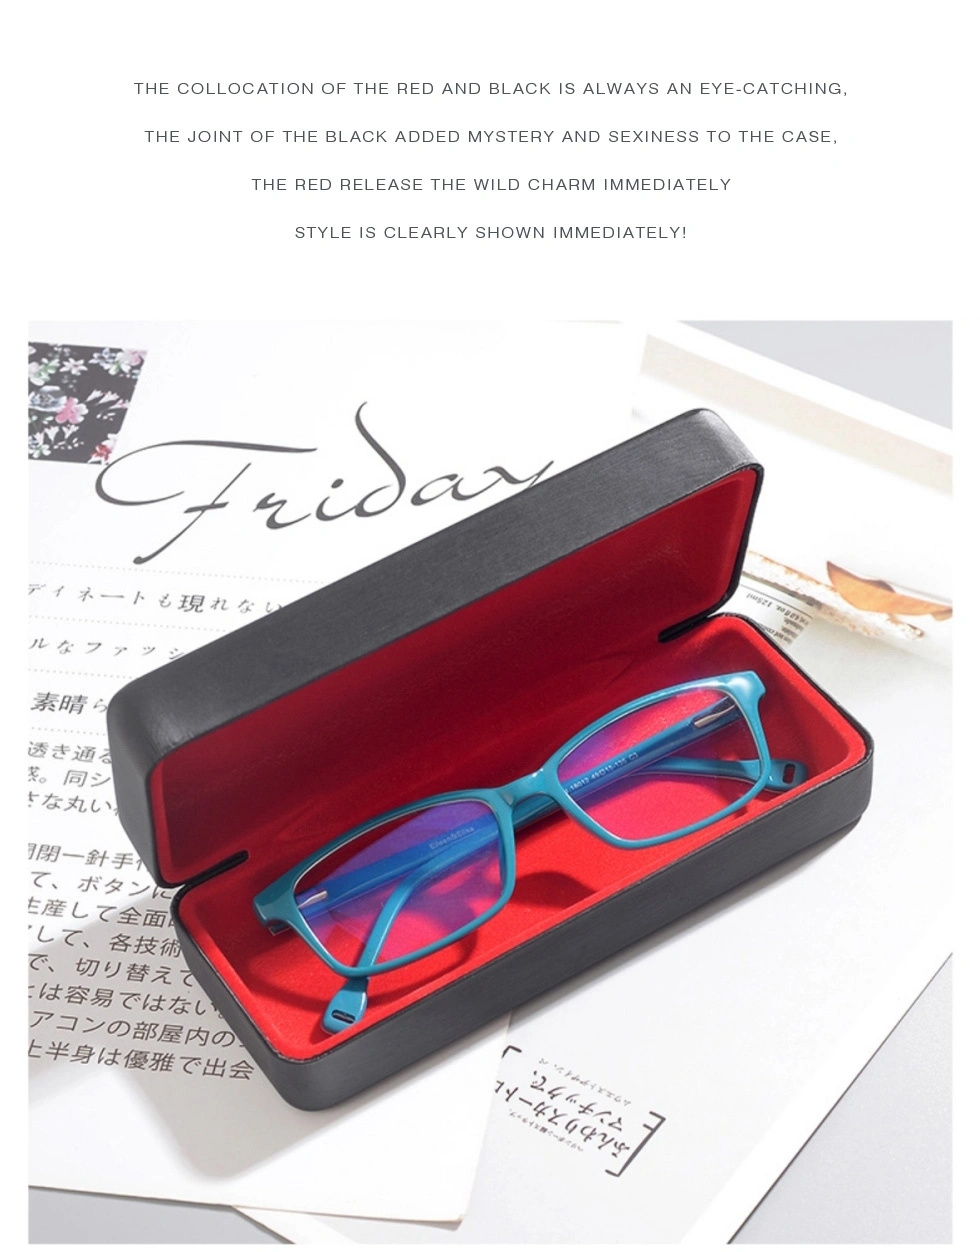 Wholesale Engraved Rectangular Hard Protective Case for Reading Glasses and Sunglasses